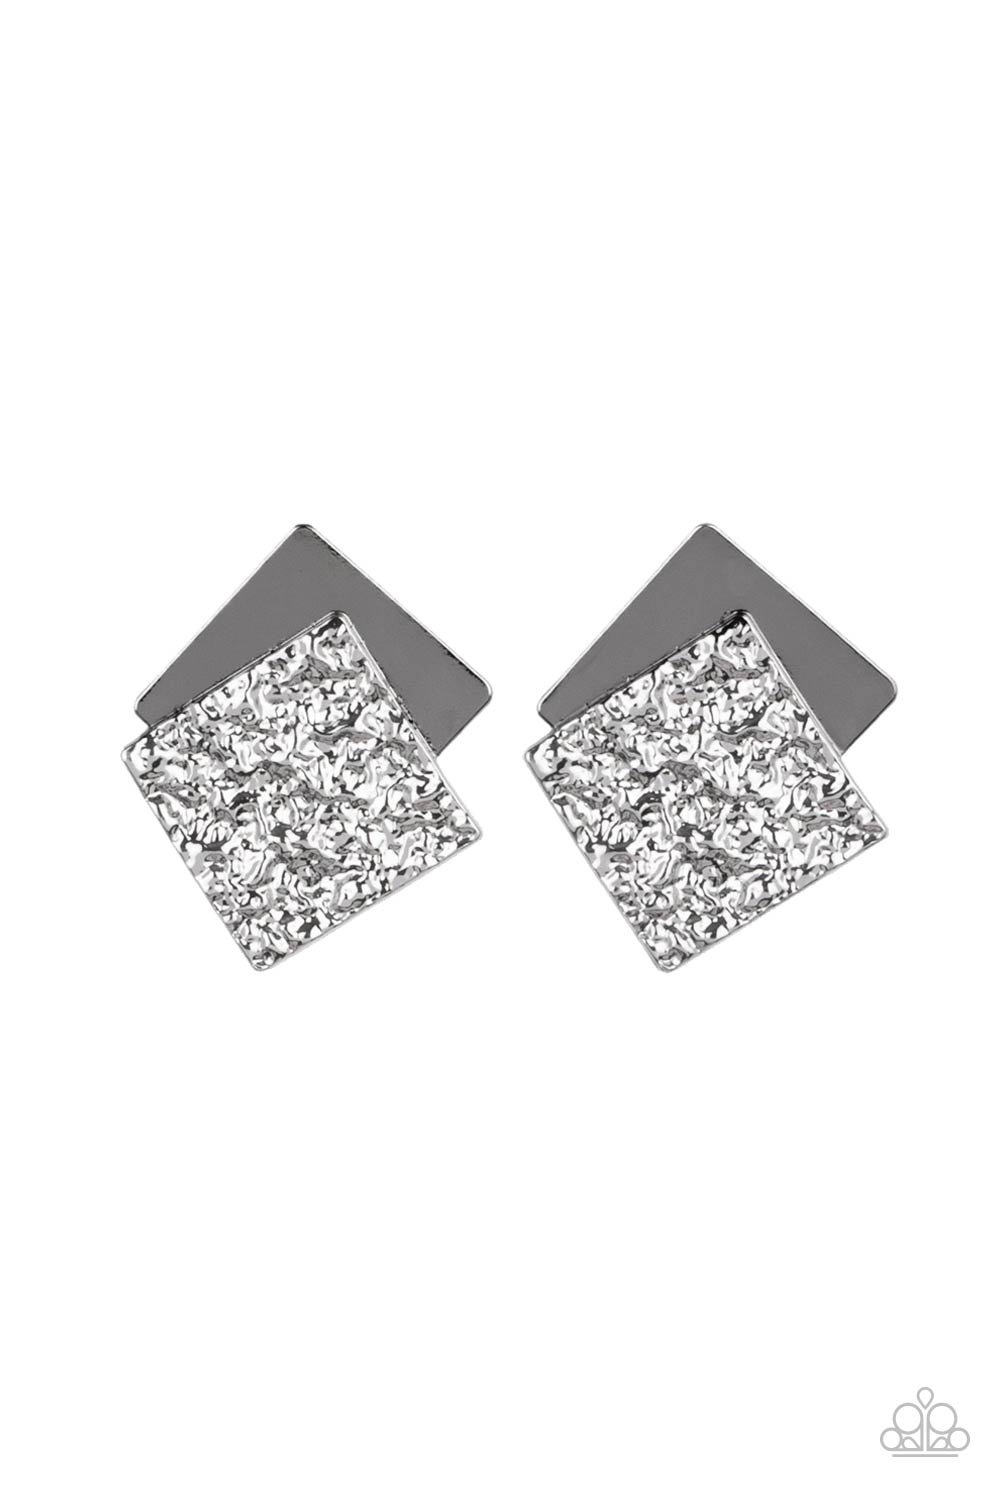 Square With Style - Black/Gunmetal post earrings